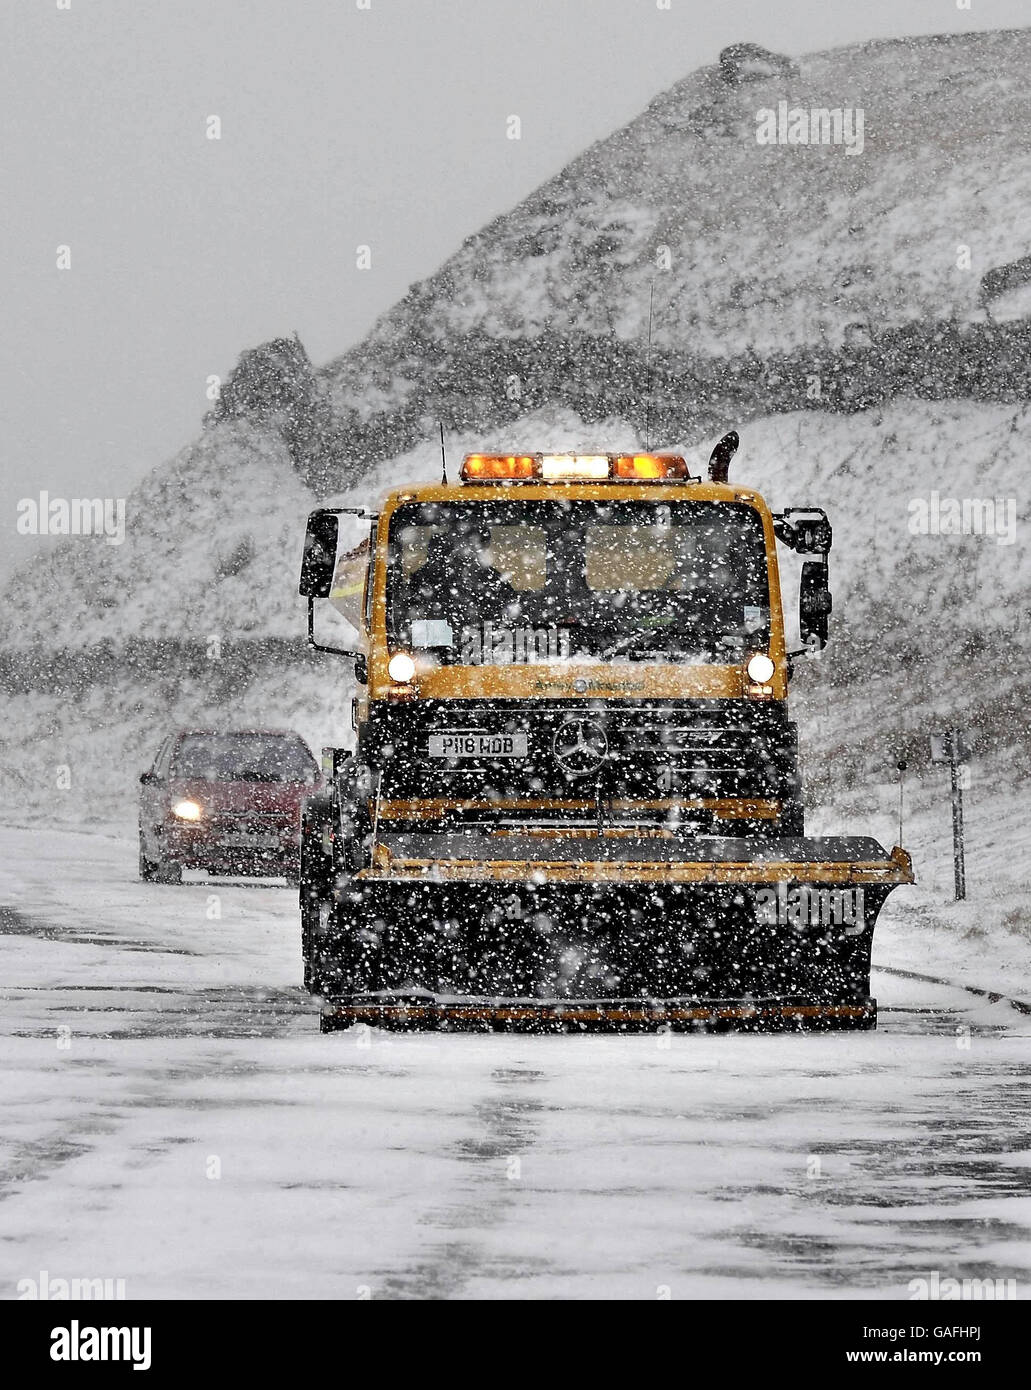 Difficult conditions on the roads of North East England today as snow ploughs work to keep trans Pennine routes like the A66 open in blizzard conditions. Stock Photo